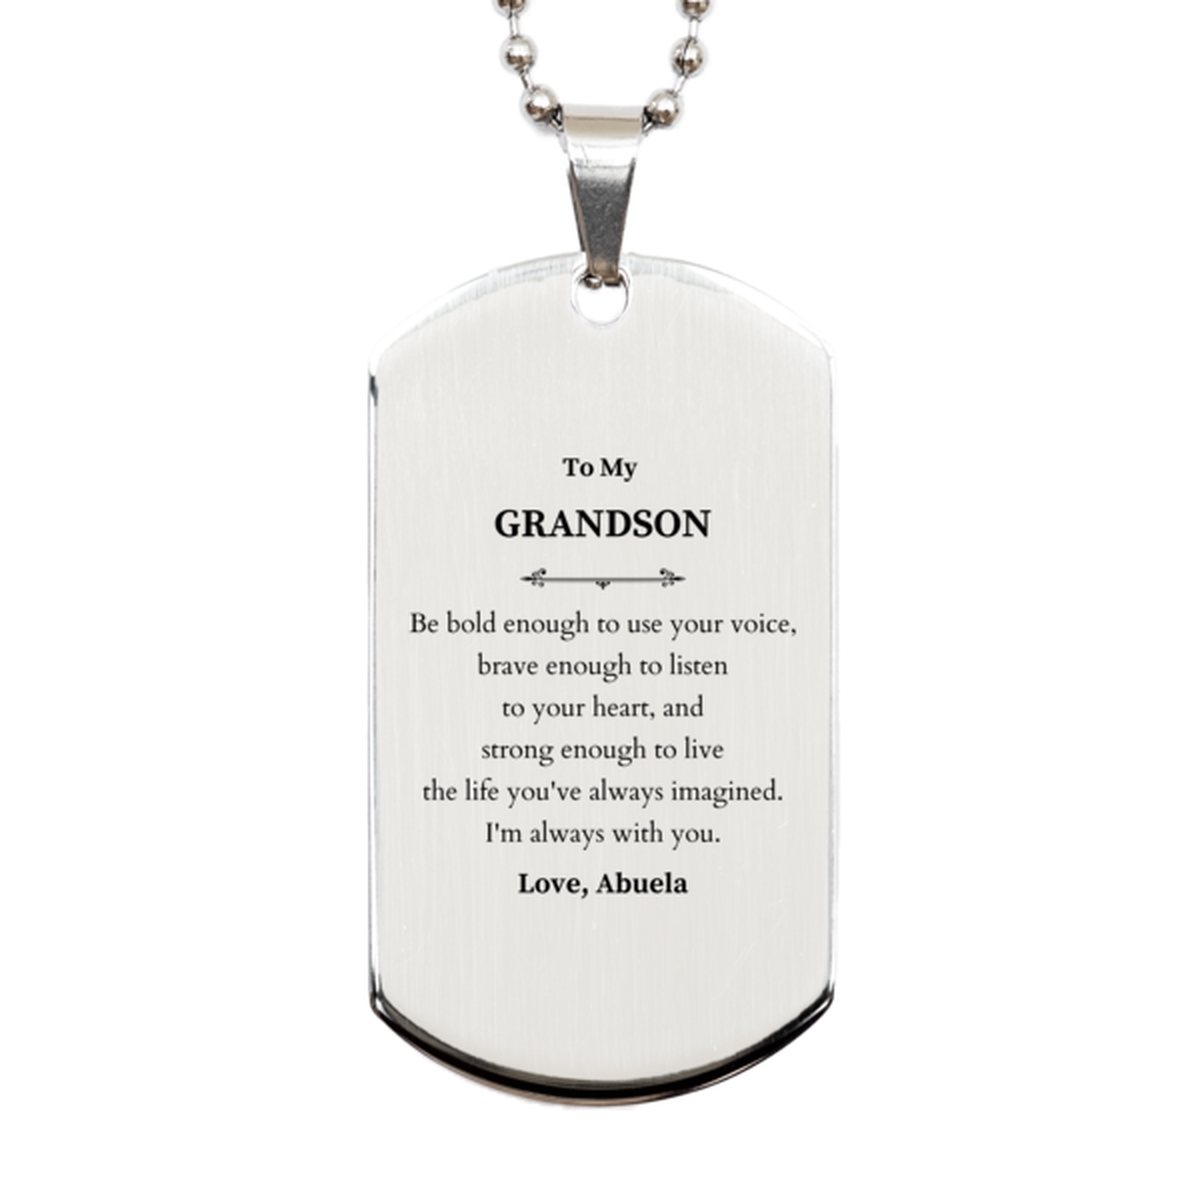 Keepsake Grandson Silver Dog Tag Gift Idea Graduation Christmas Birthday Grandson from Abuela, Grandson Be bold enough to use your voice, brave enough to listen to your heart. Love, Abuela